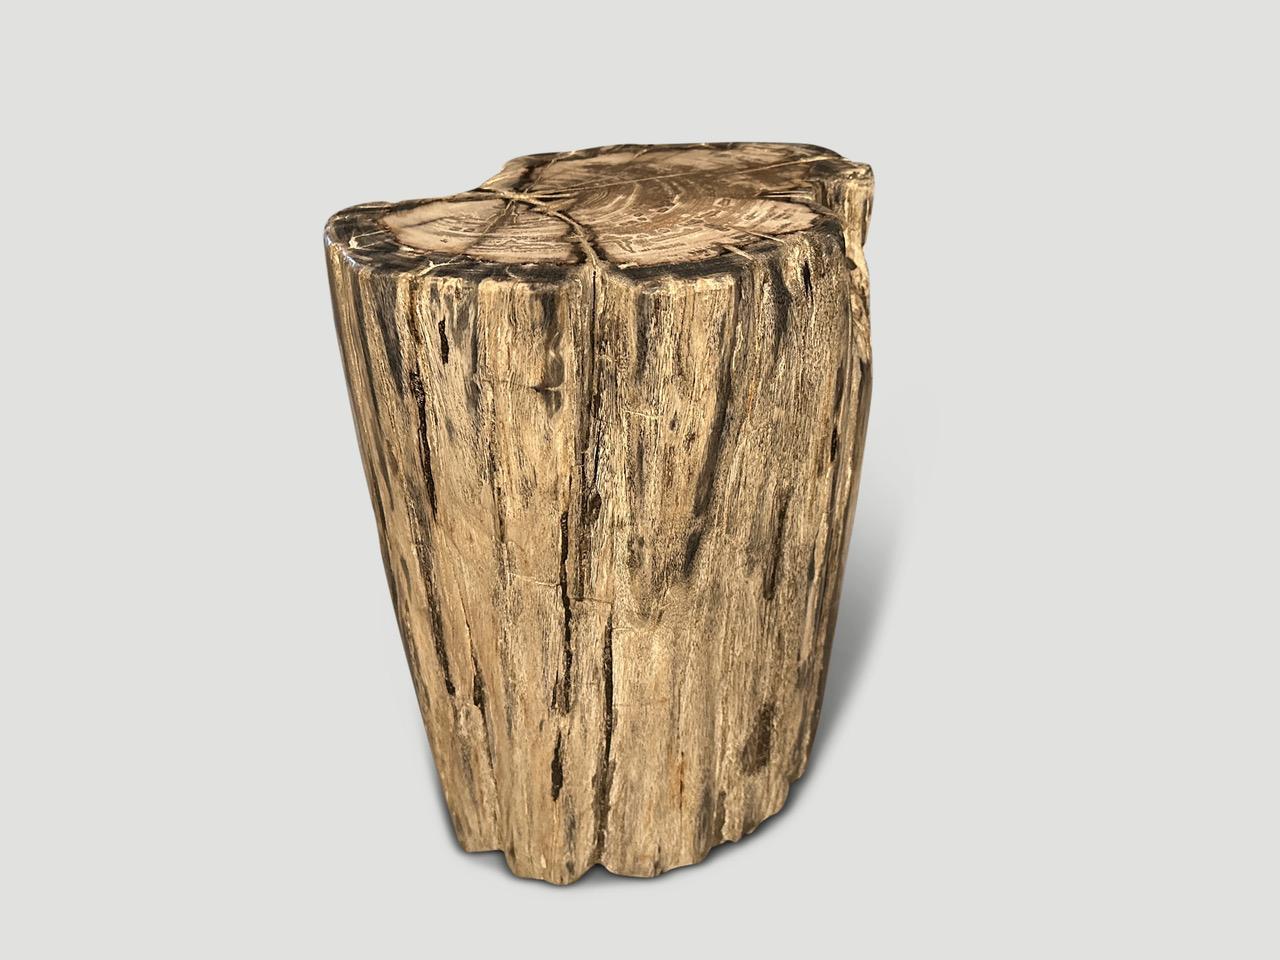 Beautiful charcoal tones and markings on this high quality petrified wood side table. It’s fascinating how Mother Nature produces these exquisite 40 million year old petrified teak logs with such contrasting colors and natural patterns throughout.